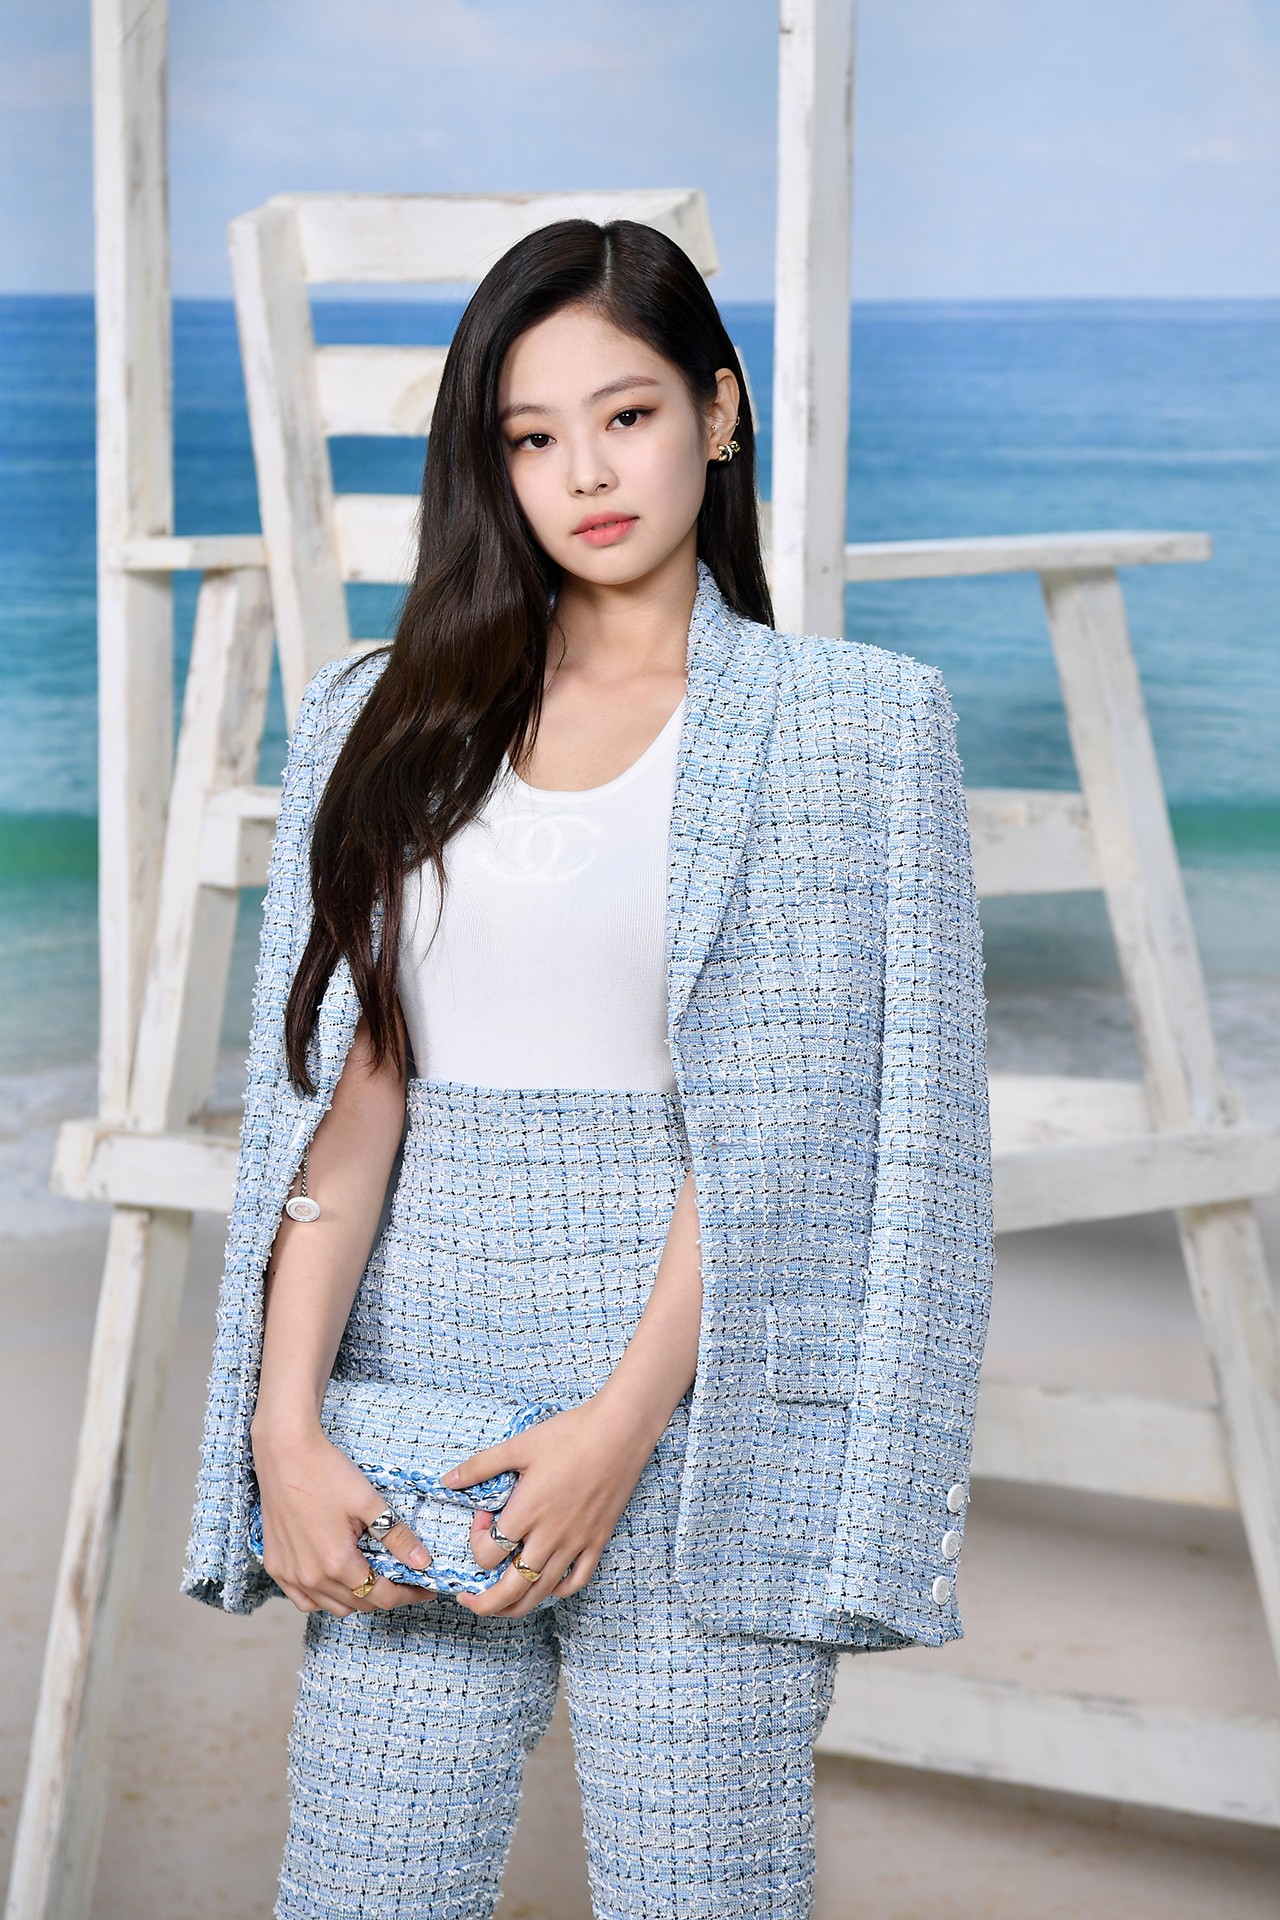 BLACKPINK Jennie Sends Her Sweet Message To Fans On Her Own Fresh ...